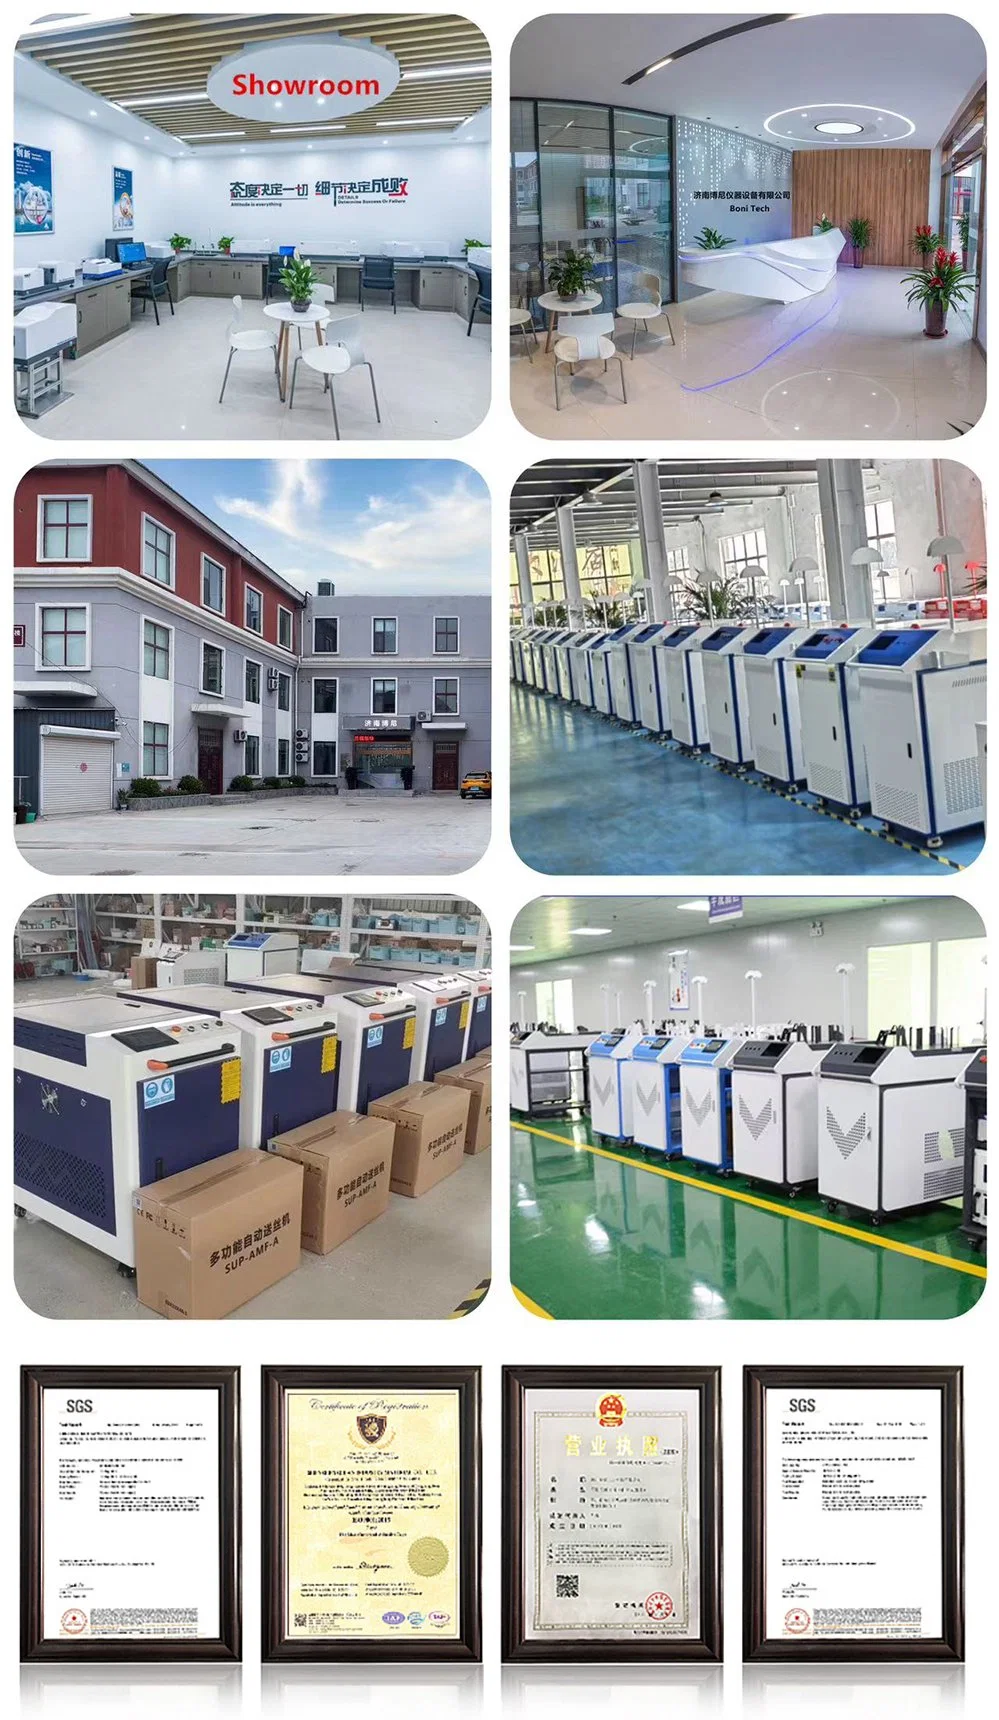 China Brand CNC Laser Cleaning Machine Oily Rust 1000 W Good Quality Fiber Laser Cleaner Price